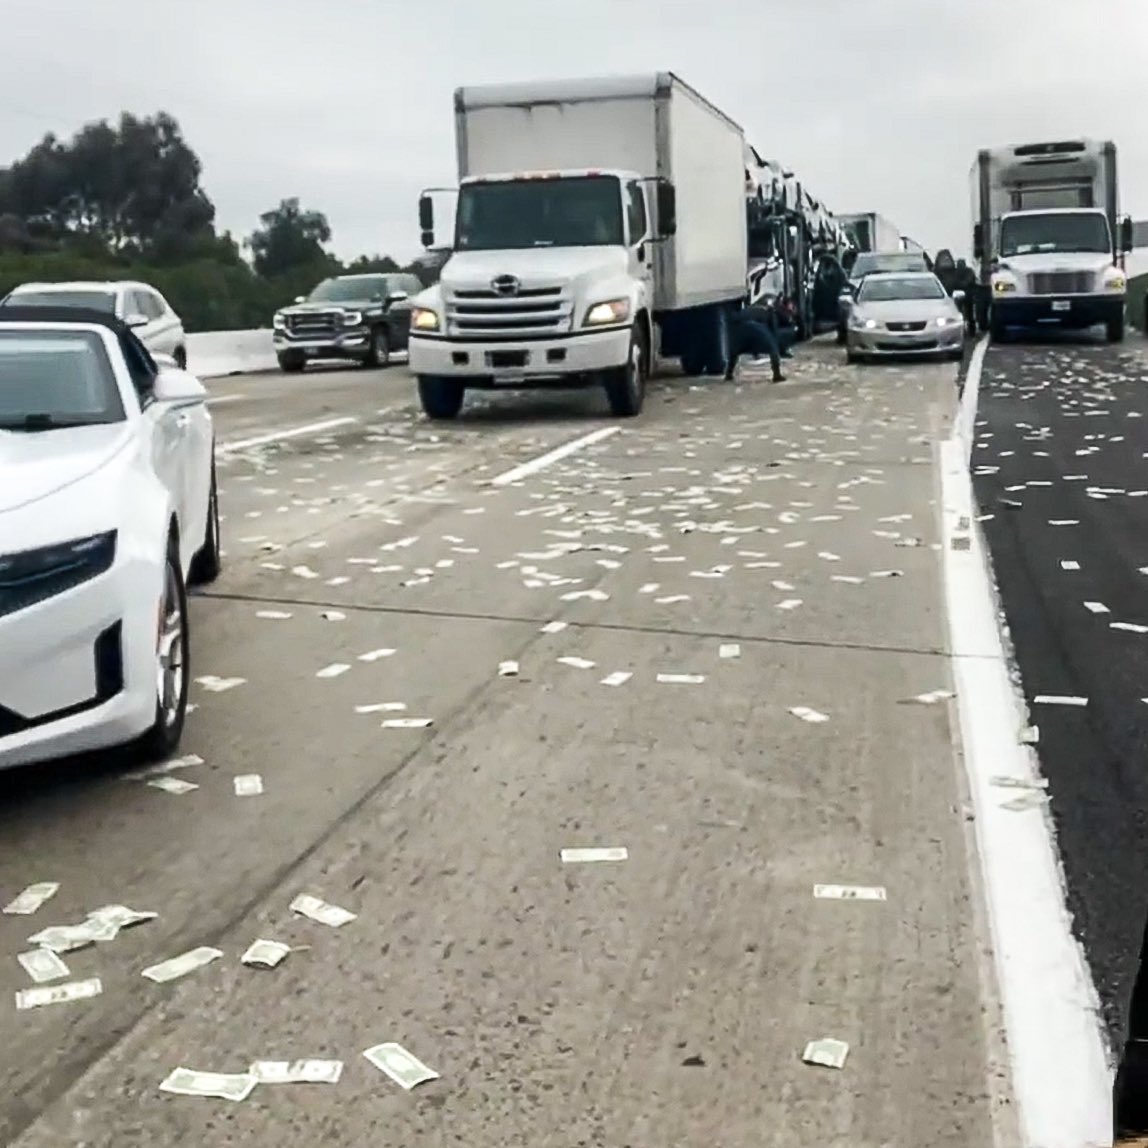 😳 Man throws $200k in cash out of a car window onto the interstate in Oregon. Investigators said the money belonged to the man and his family. The man drained the family’s shared bank account in cash and then let it fly along the freeway.